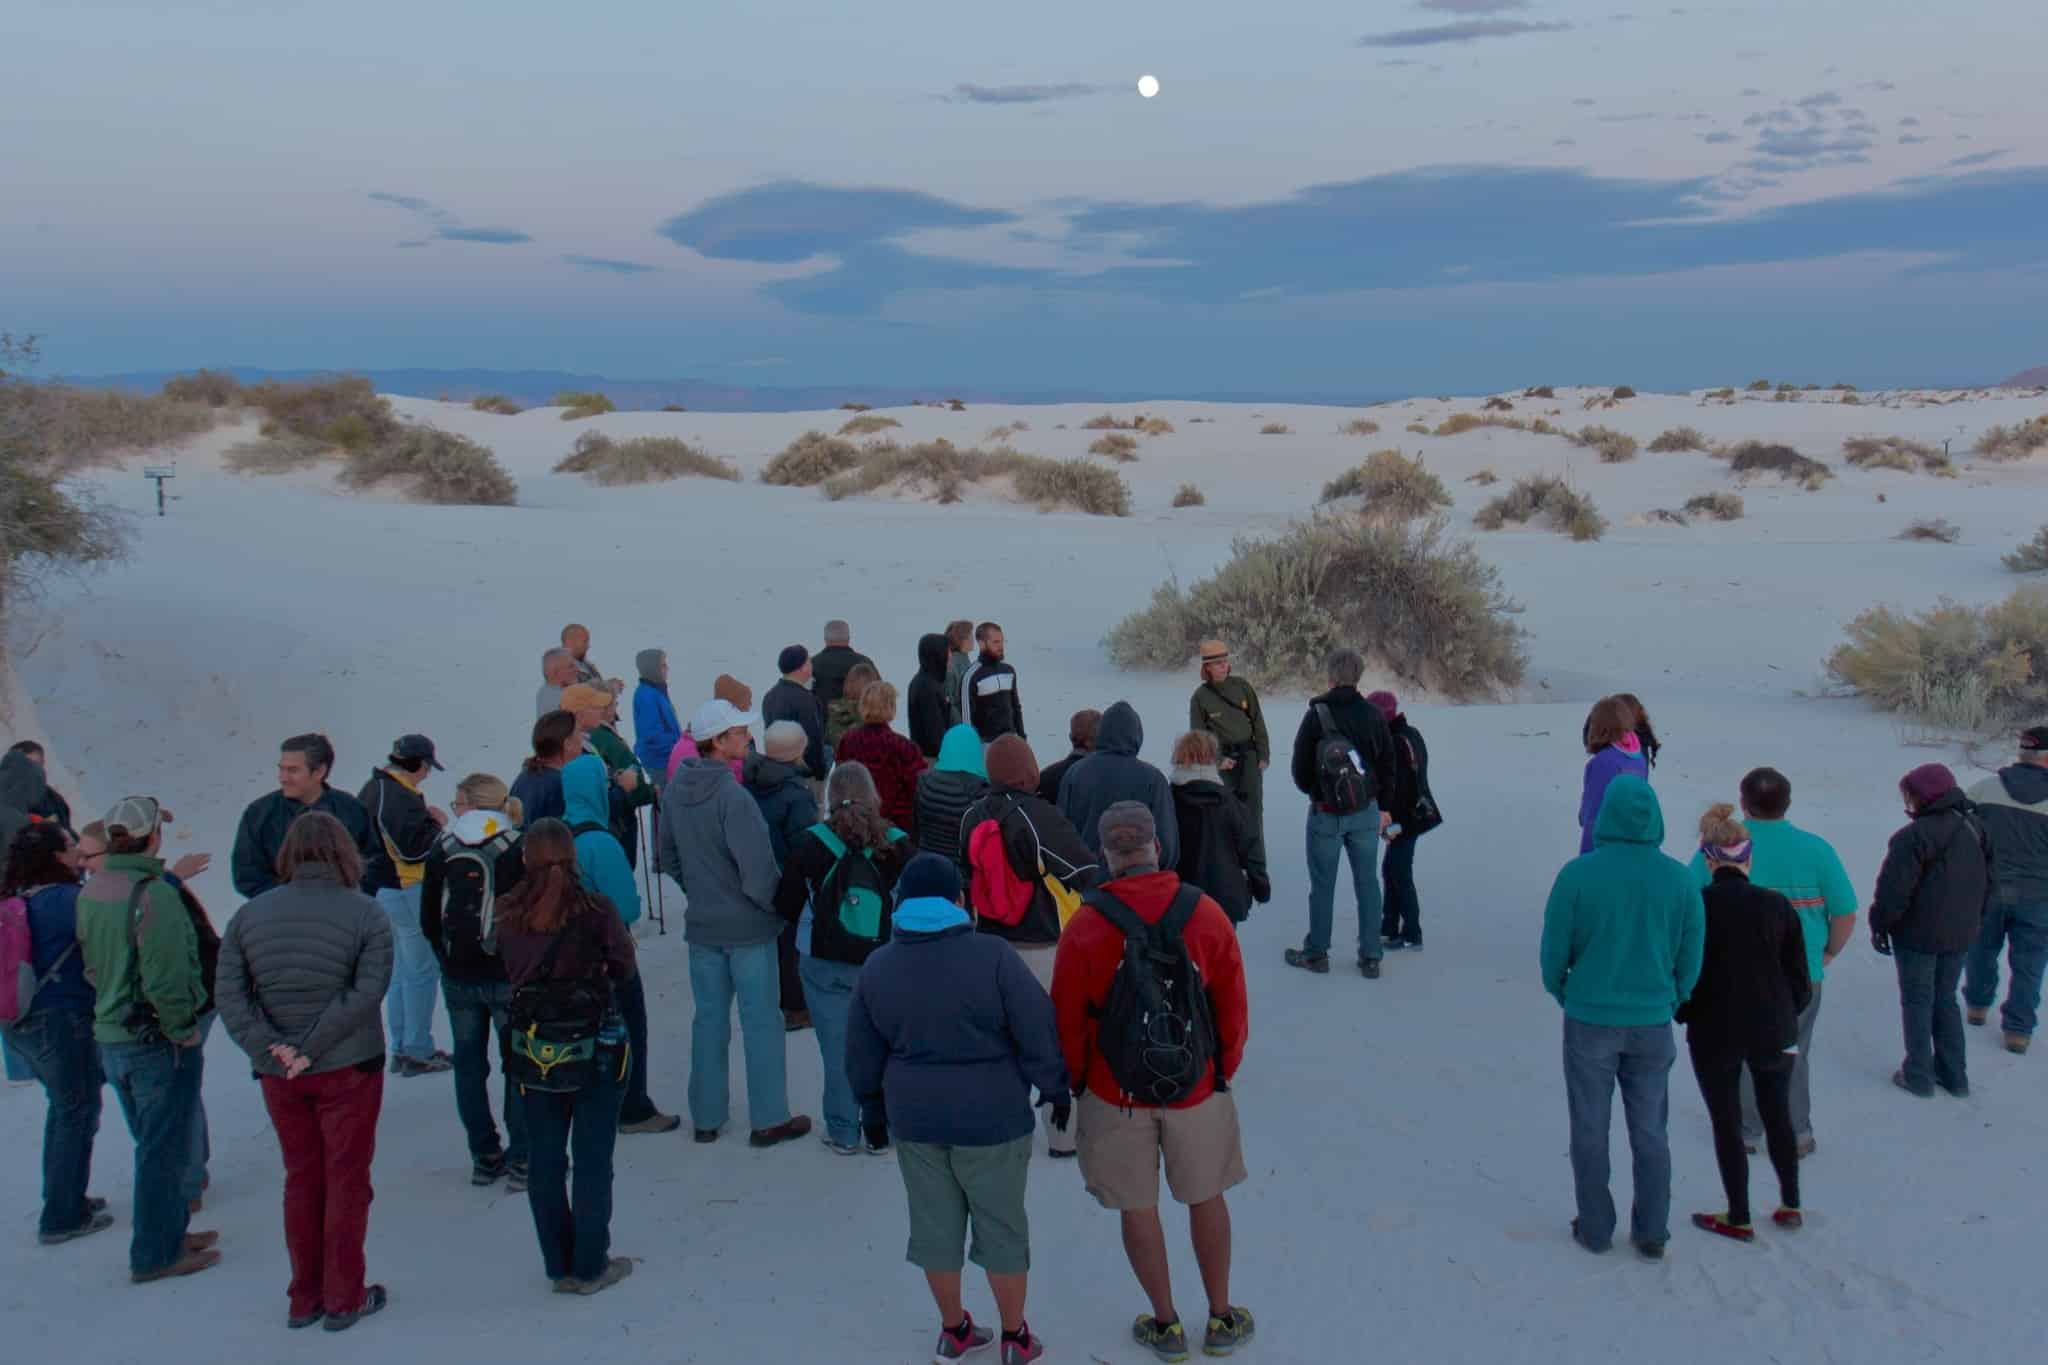 A group of people standing in the desert at dusk, attending one of the Night Sky Programs offered at White Sands National Park.